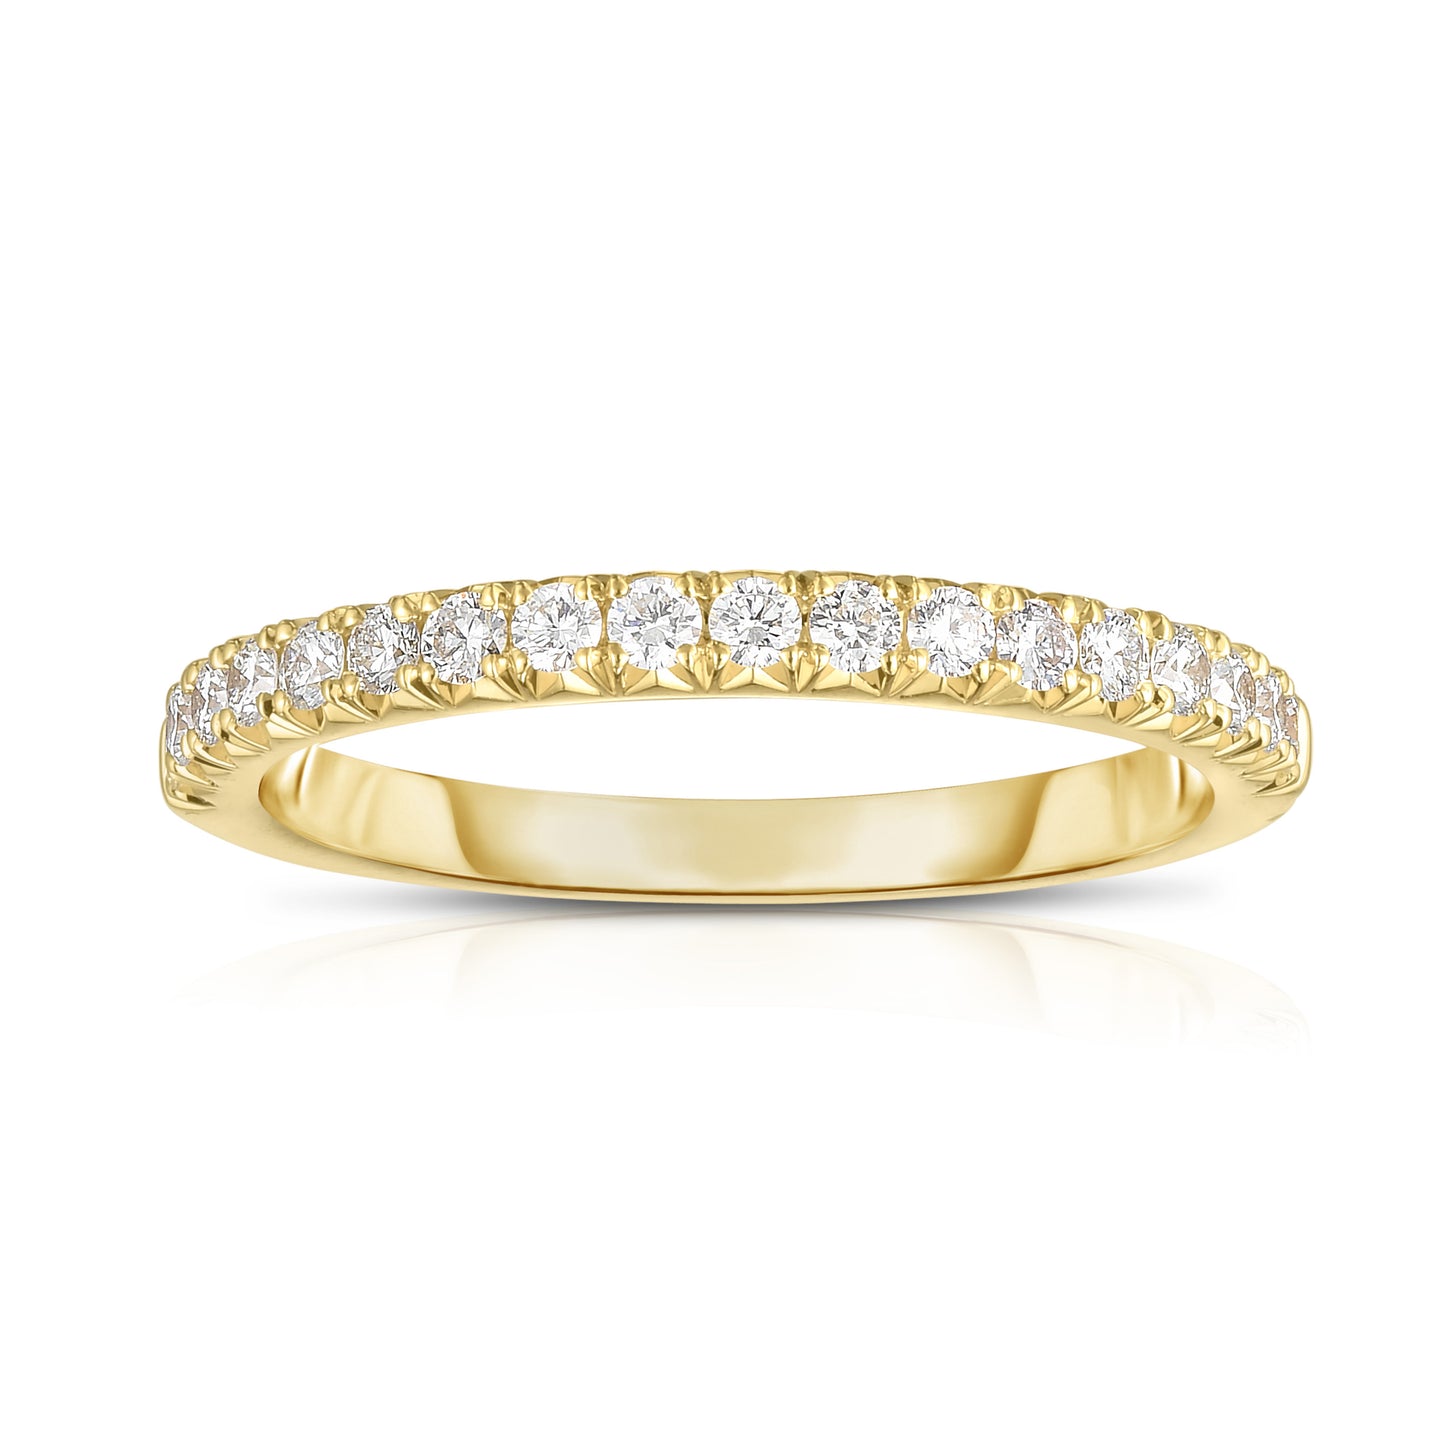 1/2 Way French Cut Diamond band in Yellow Gold